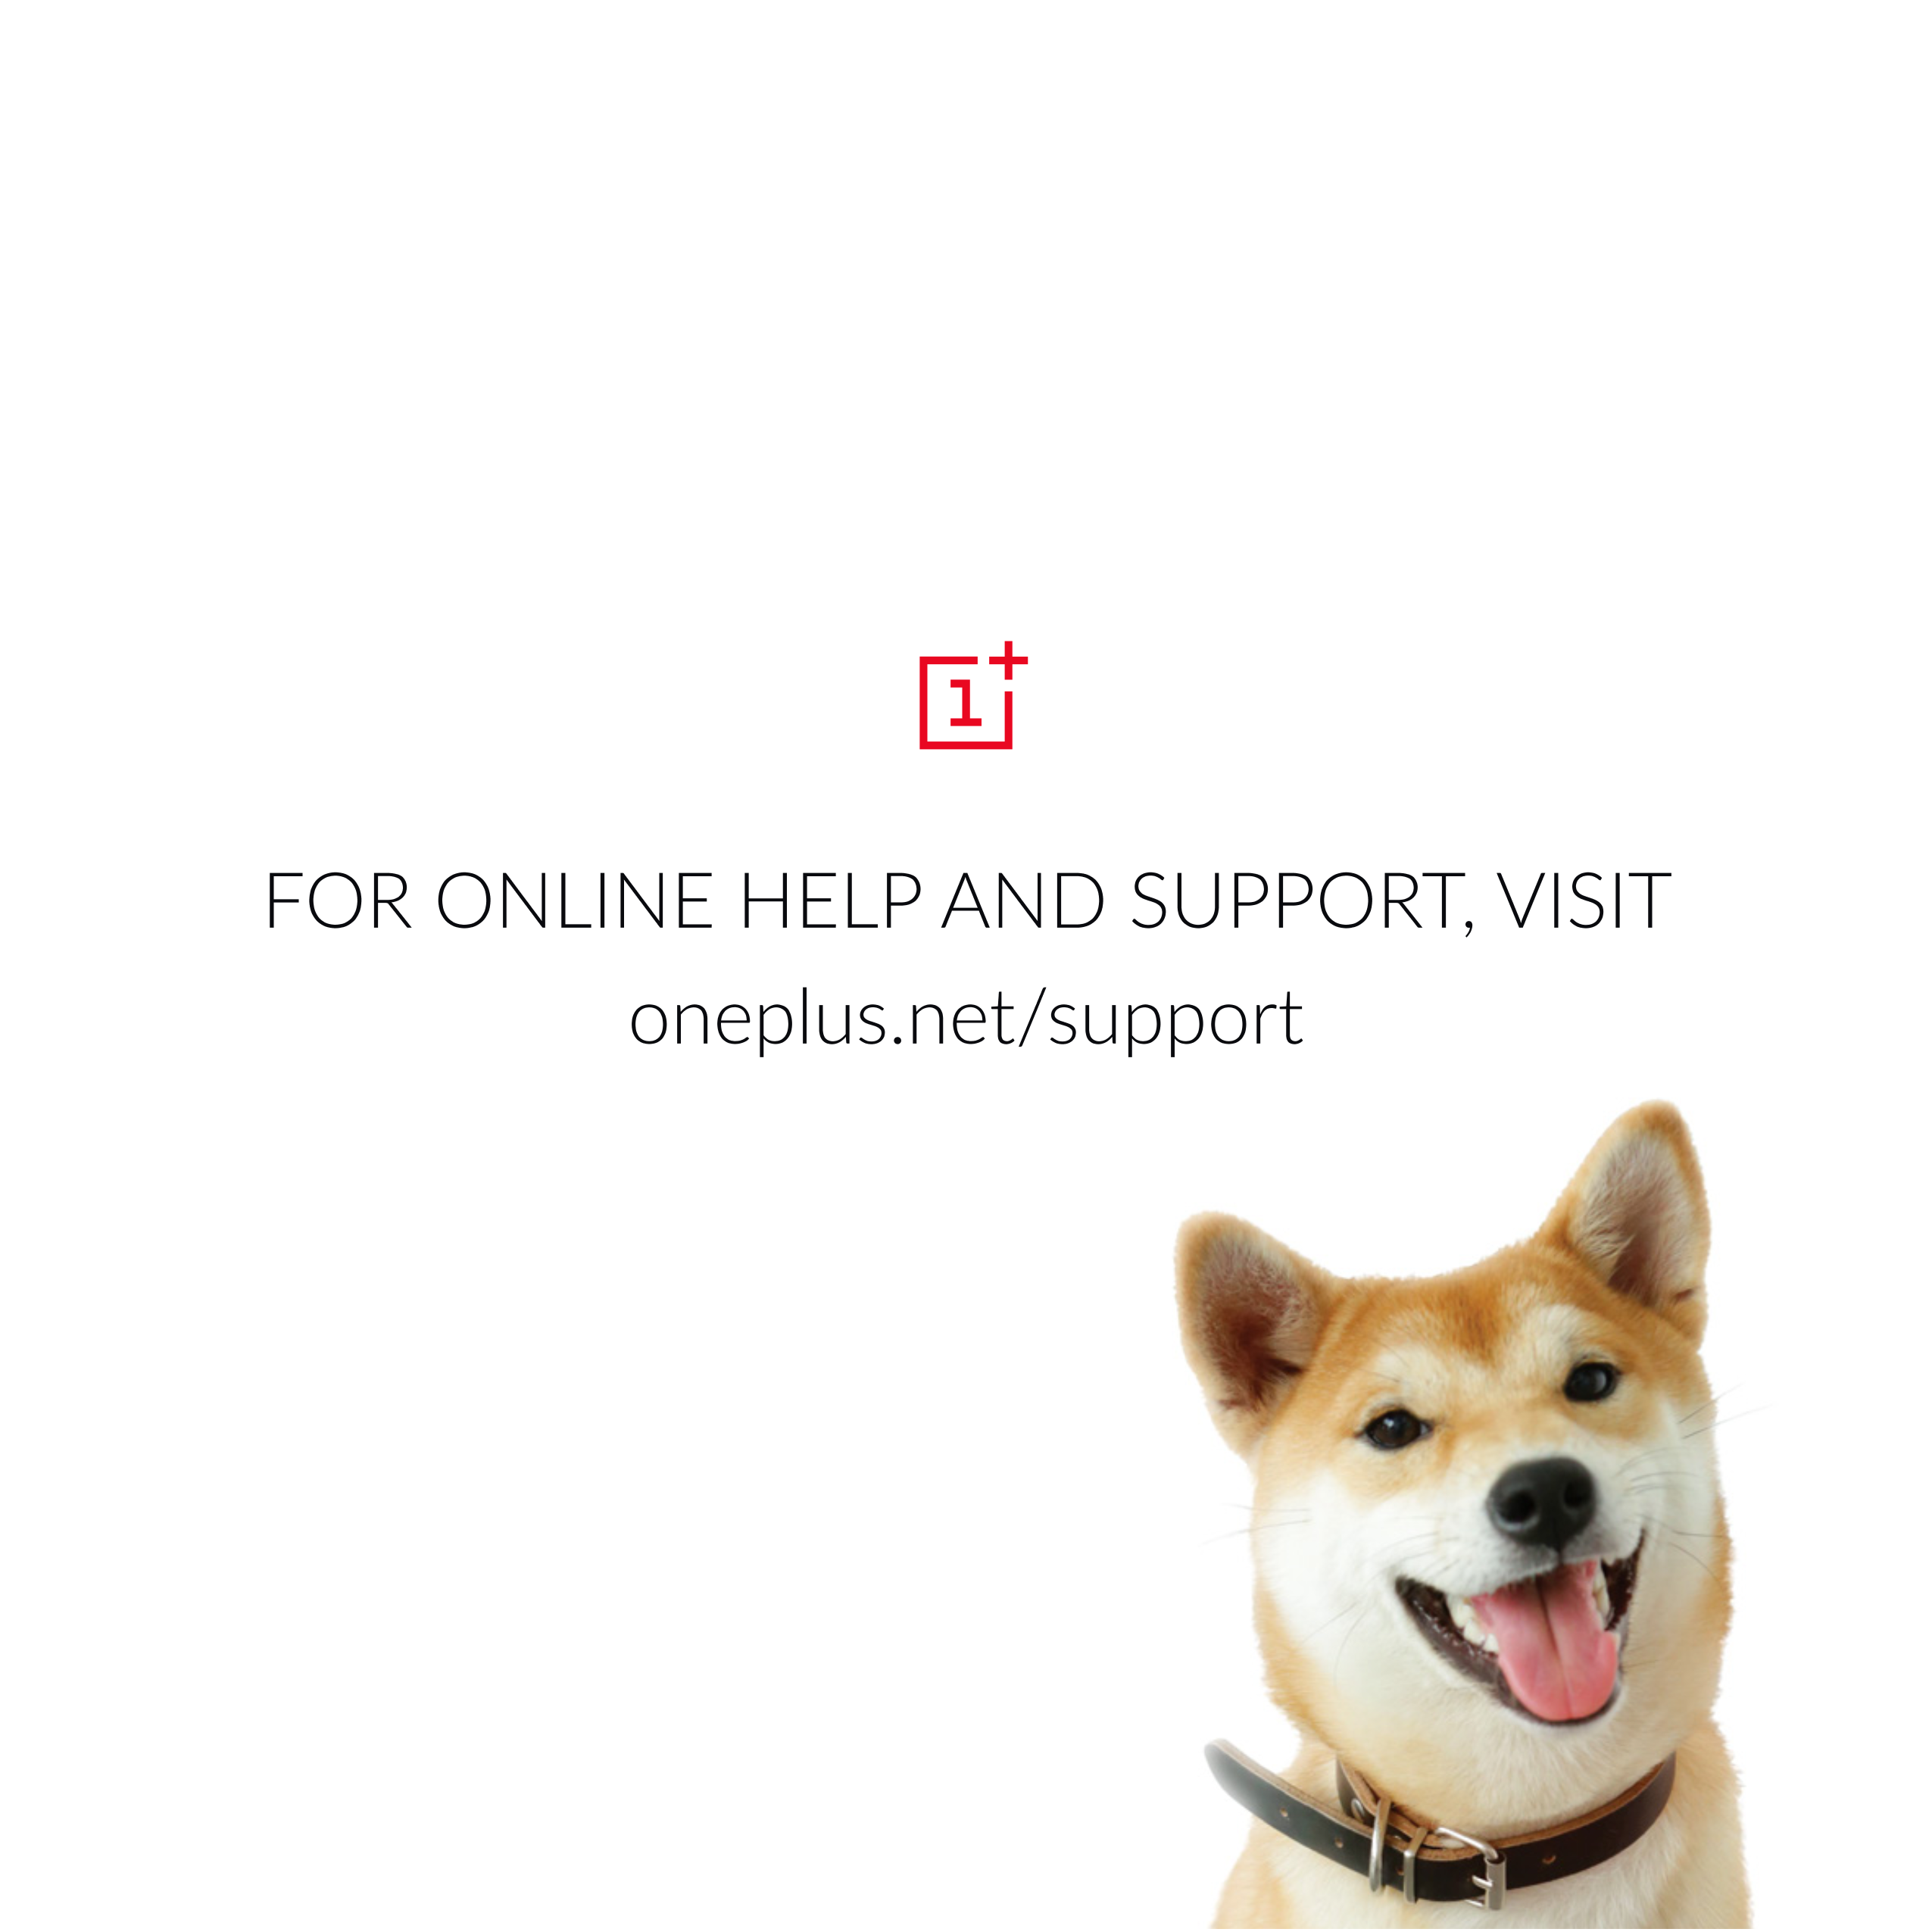 FOR ONLINE HELP  AND SUPPORT,  VISIT
oneplus.net/support